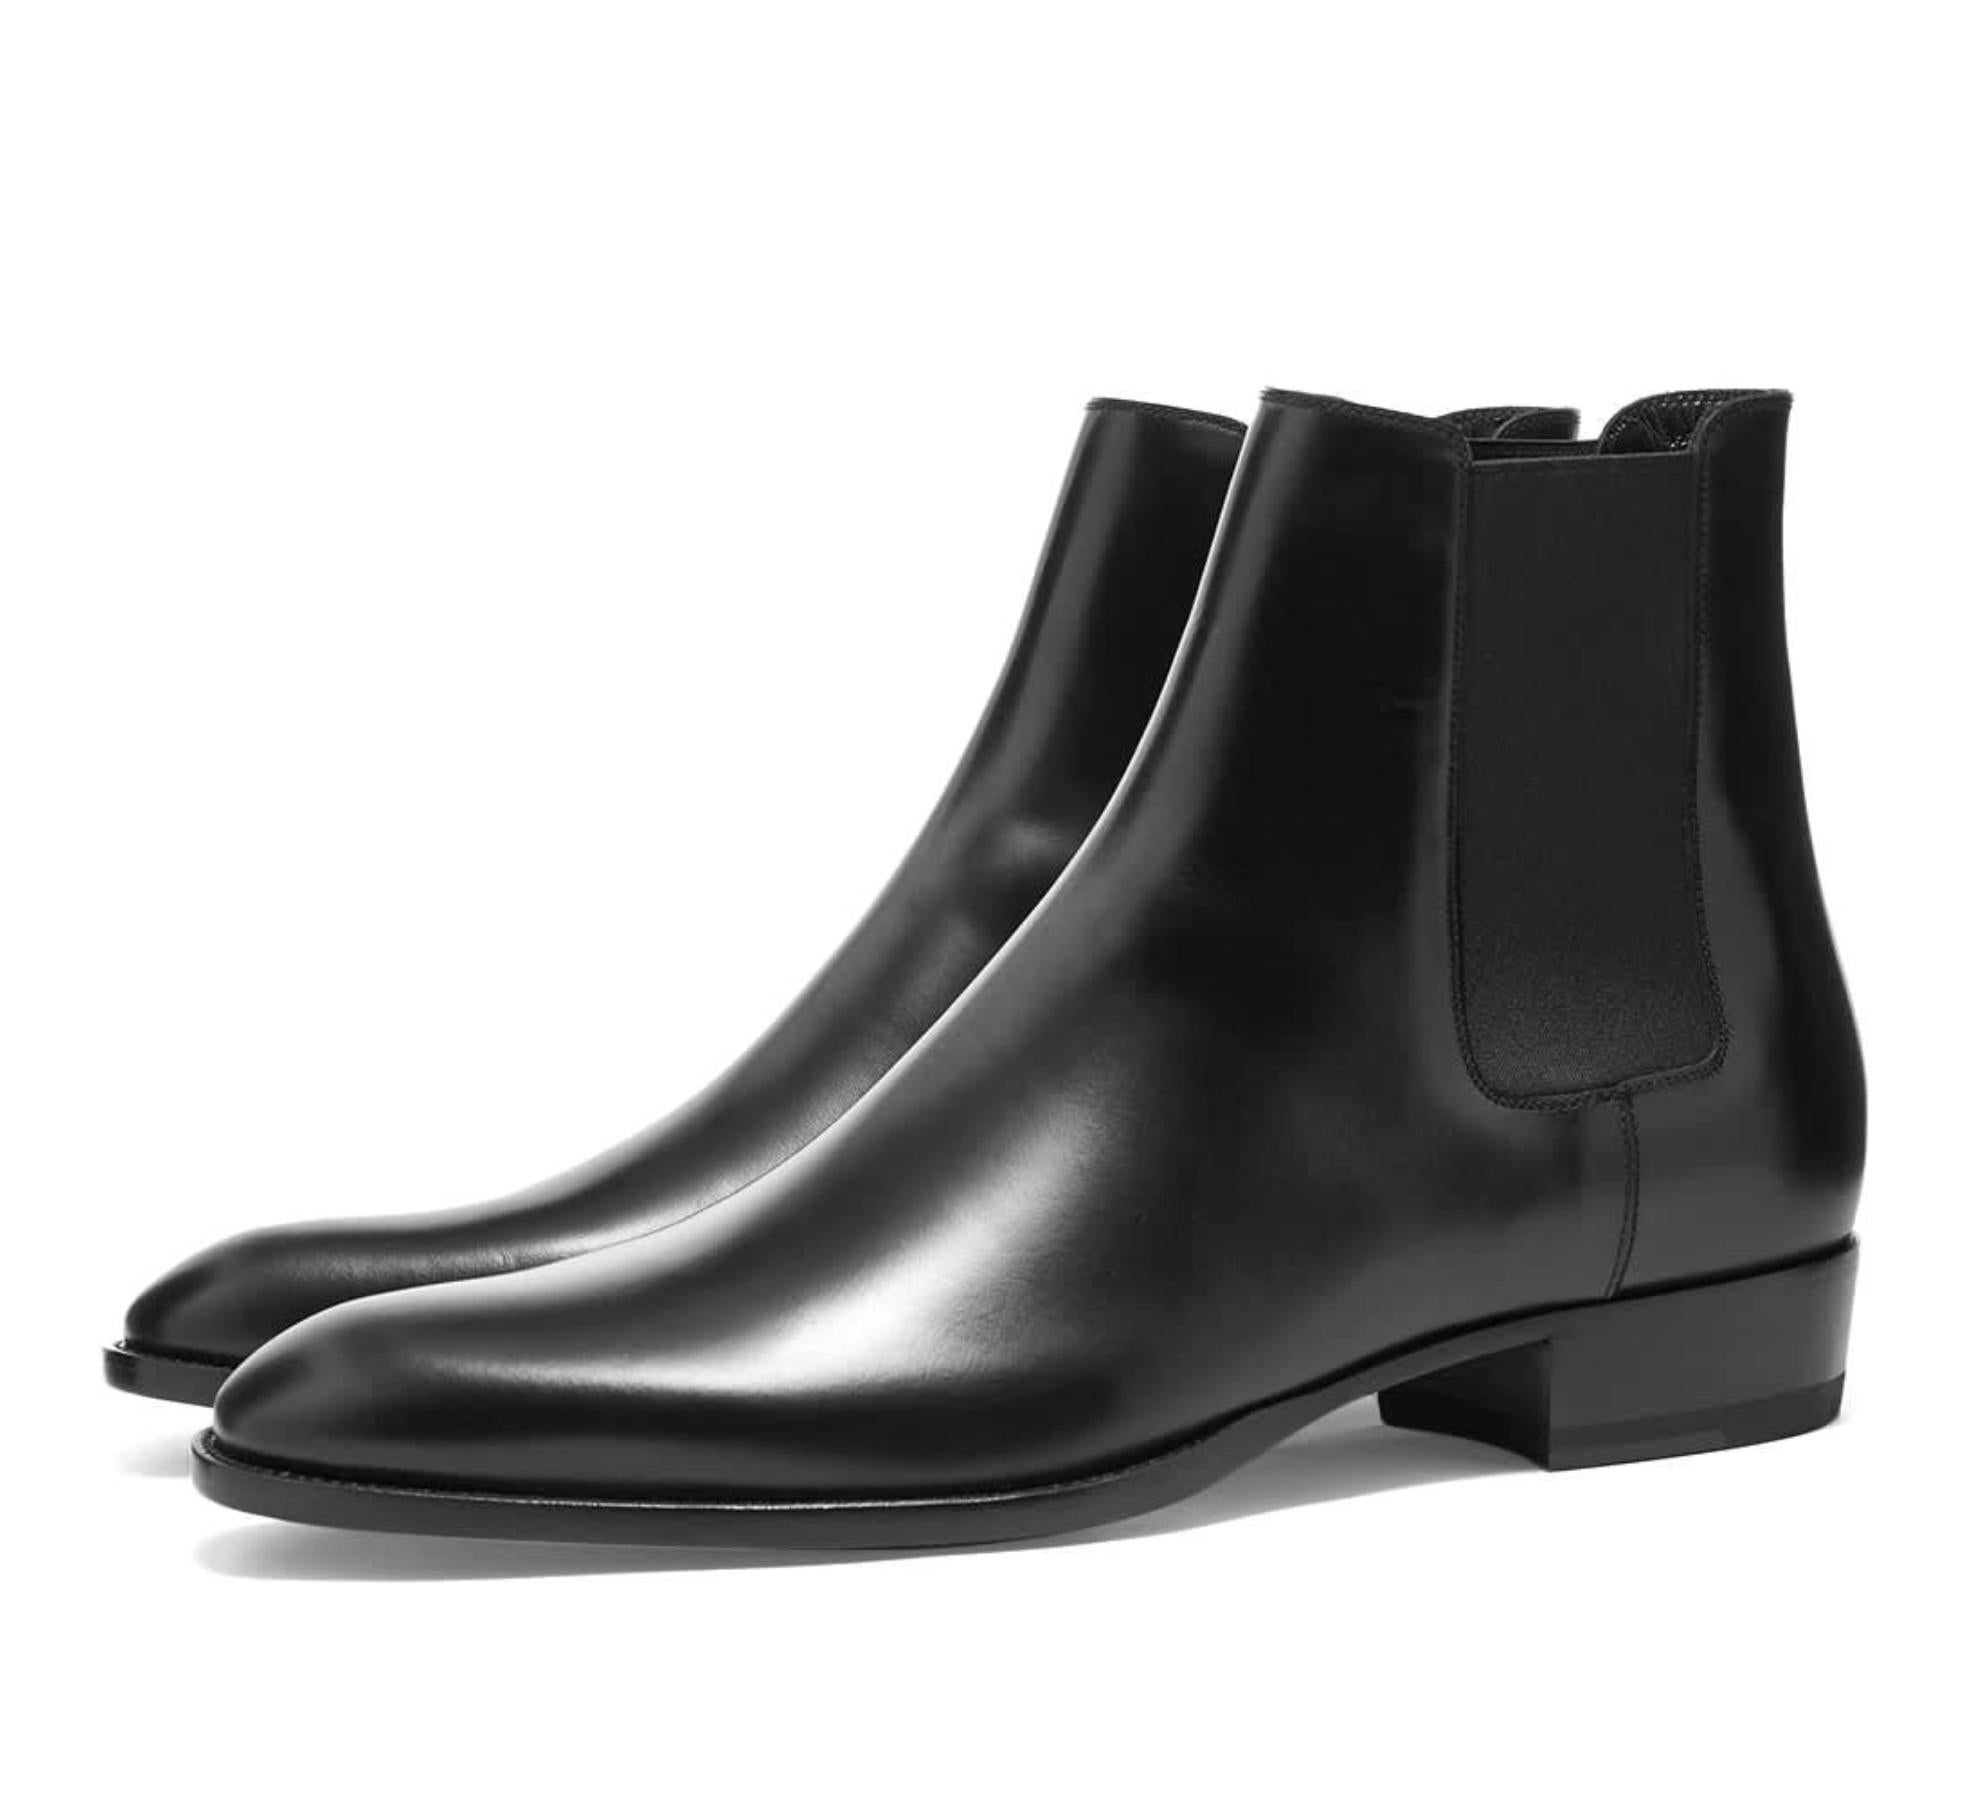 Saint Laurent Mens Black Smooth Leather Wyatt 30 Chelsea Boot

Saint Laurent takes on the iconic Chelsea boot with its signature rock ‘n’ roll style with the Wyatt boot. It’s crafted in Italy with soft calfskin leather and has a 30mm heel. Brand